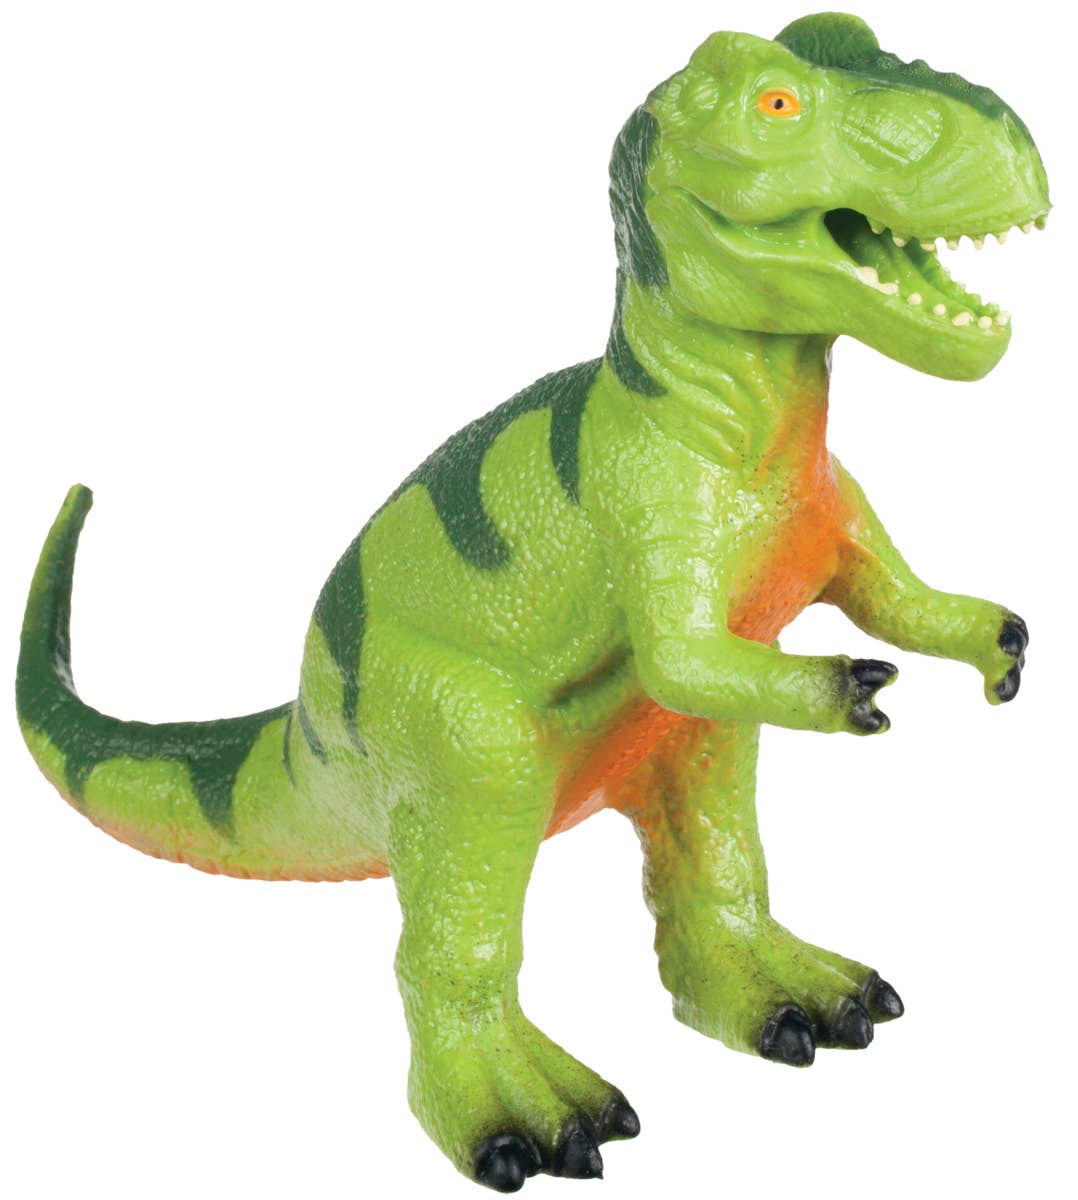 Dino Squishimals Toy, Assorted Size & Colors- Each